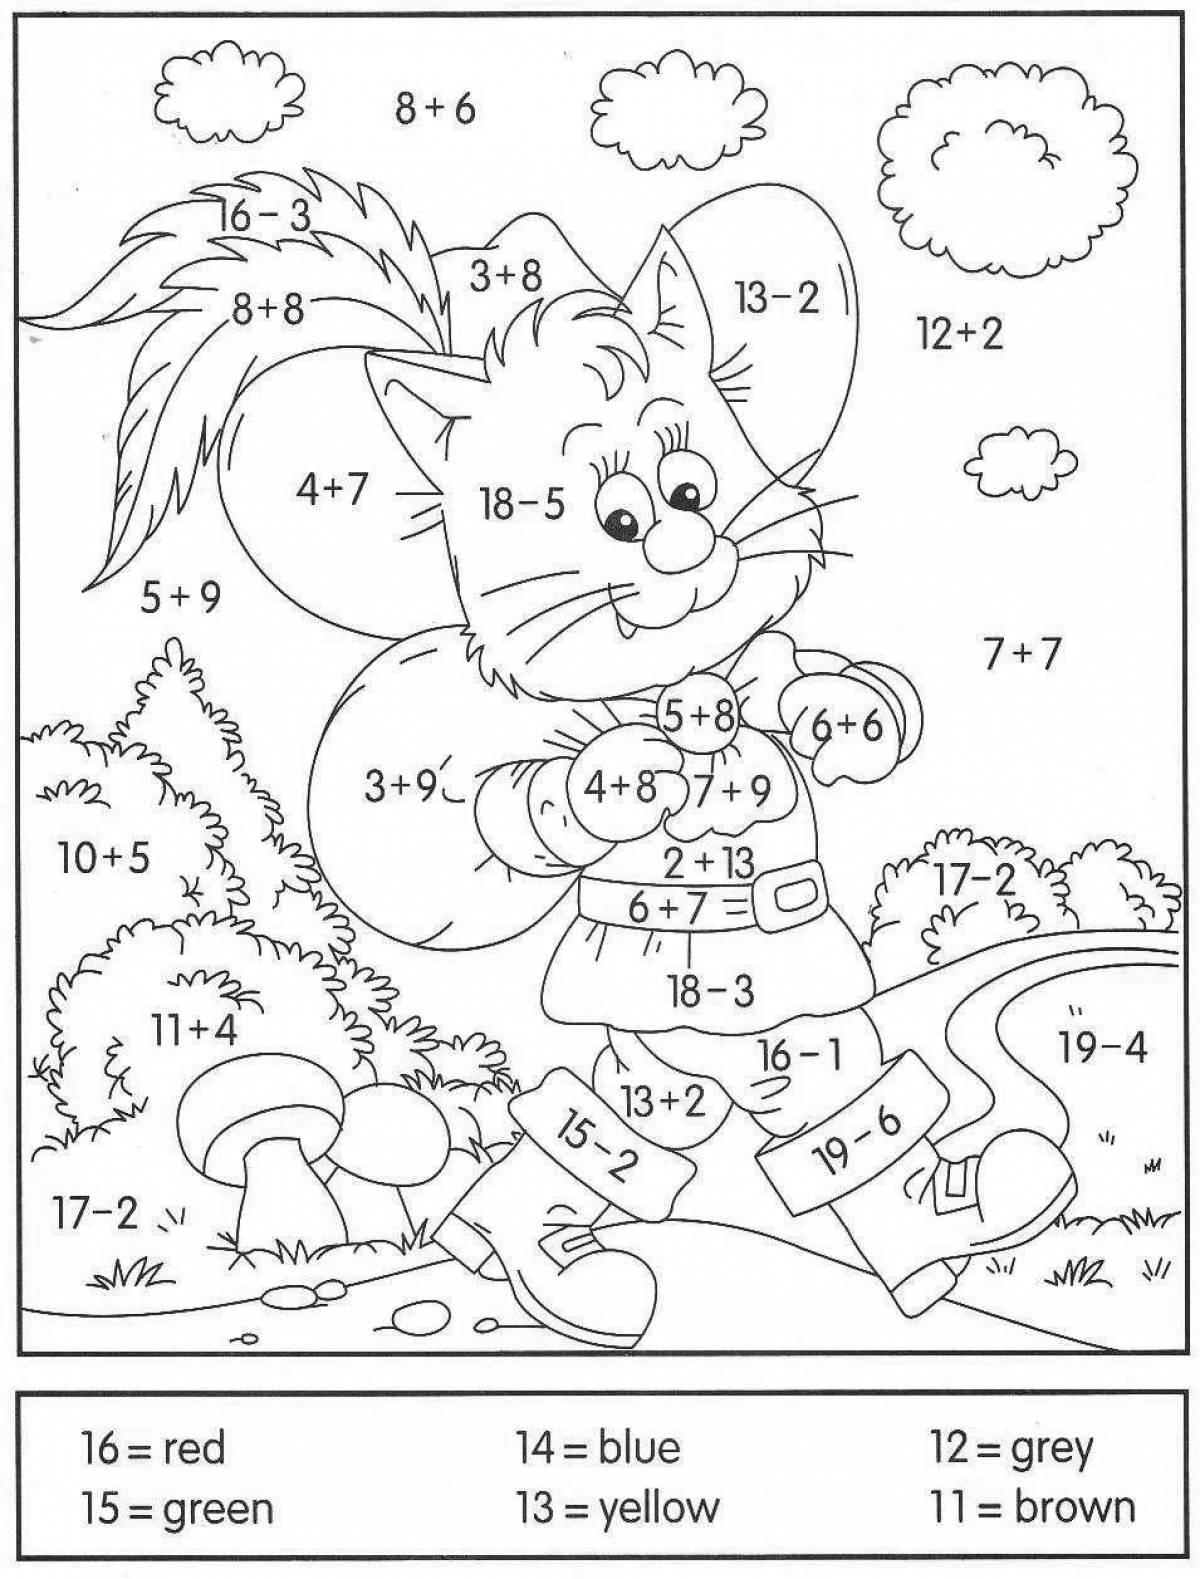 Intriguing math coloring book addition for 2nd grade for 20 years